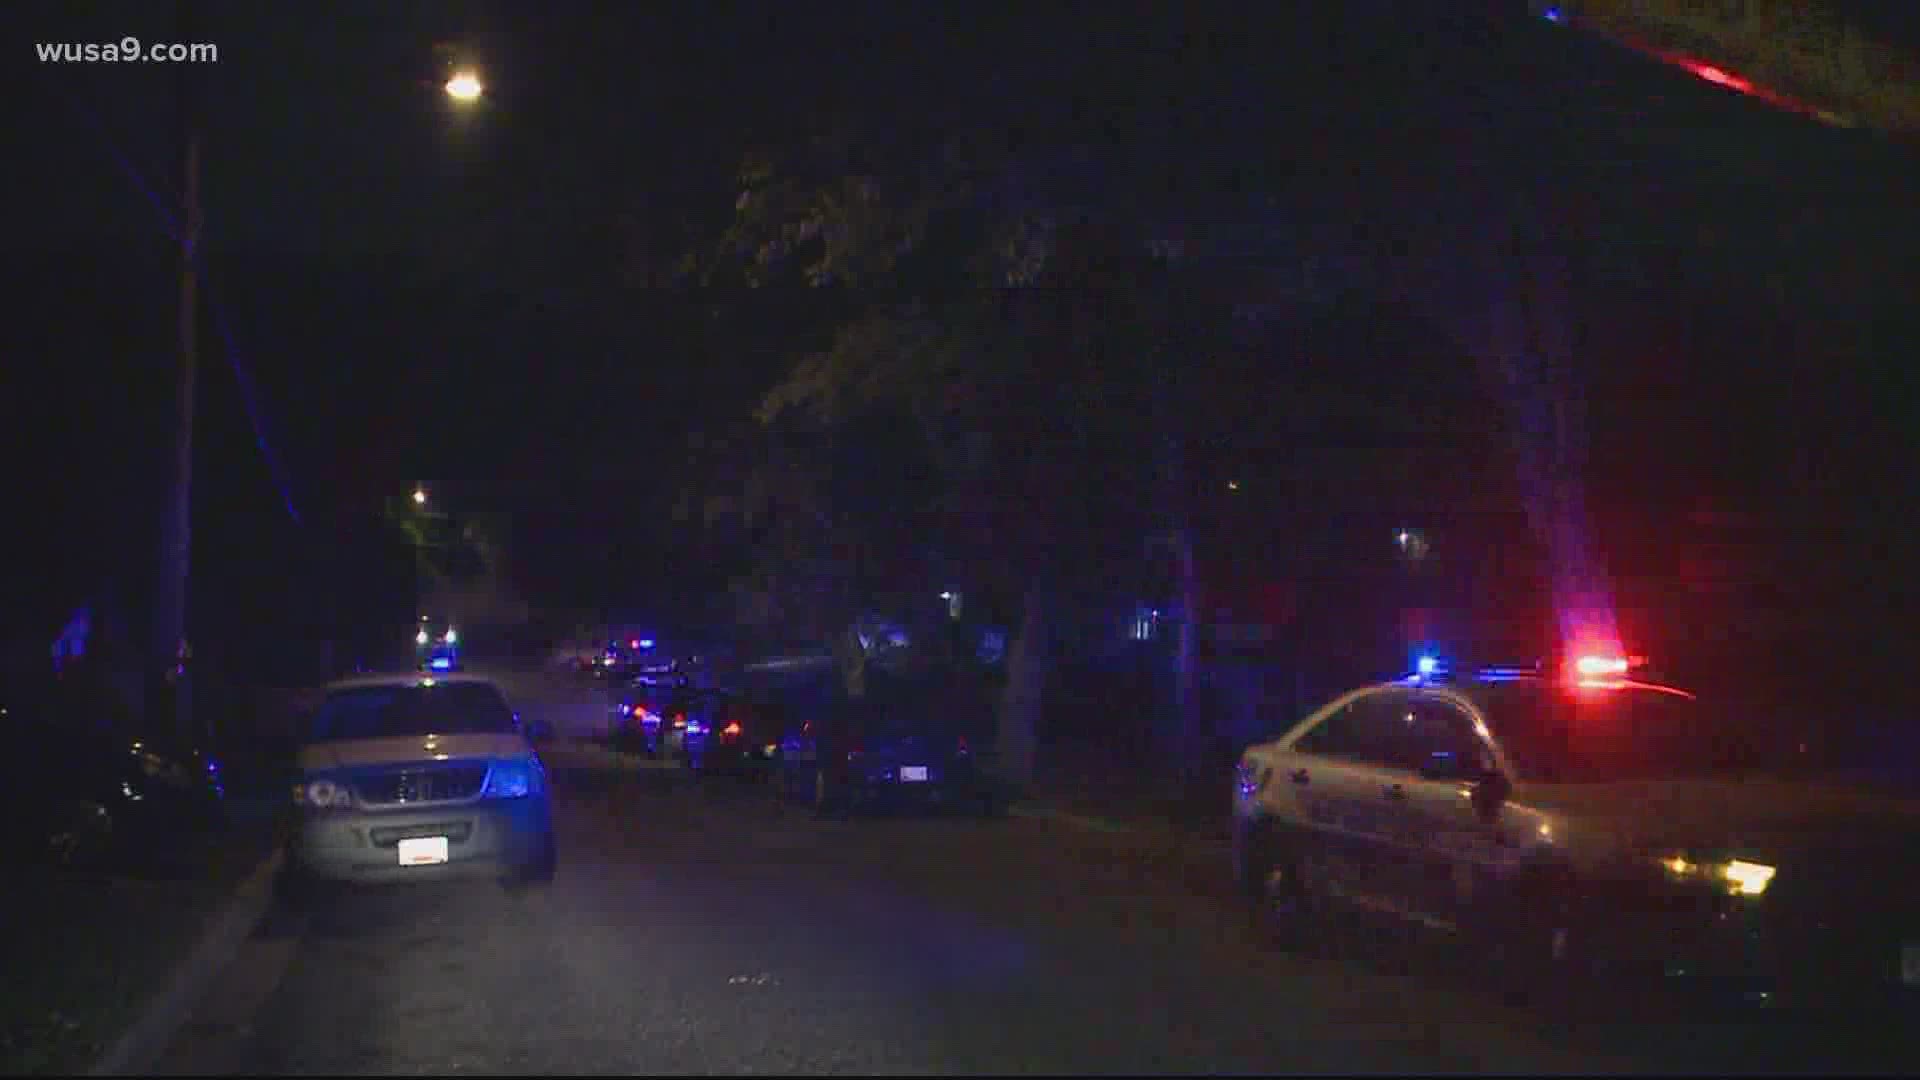 Police are still searching for the suspect who shot and killed a man Wednesday night.